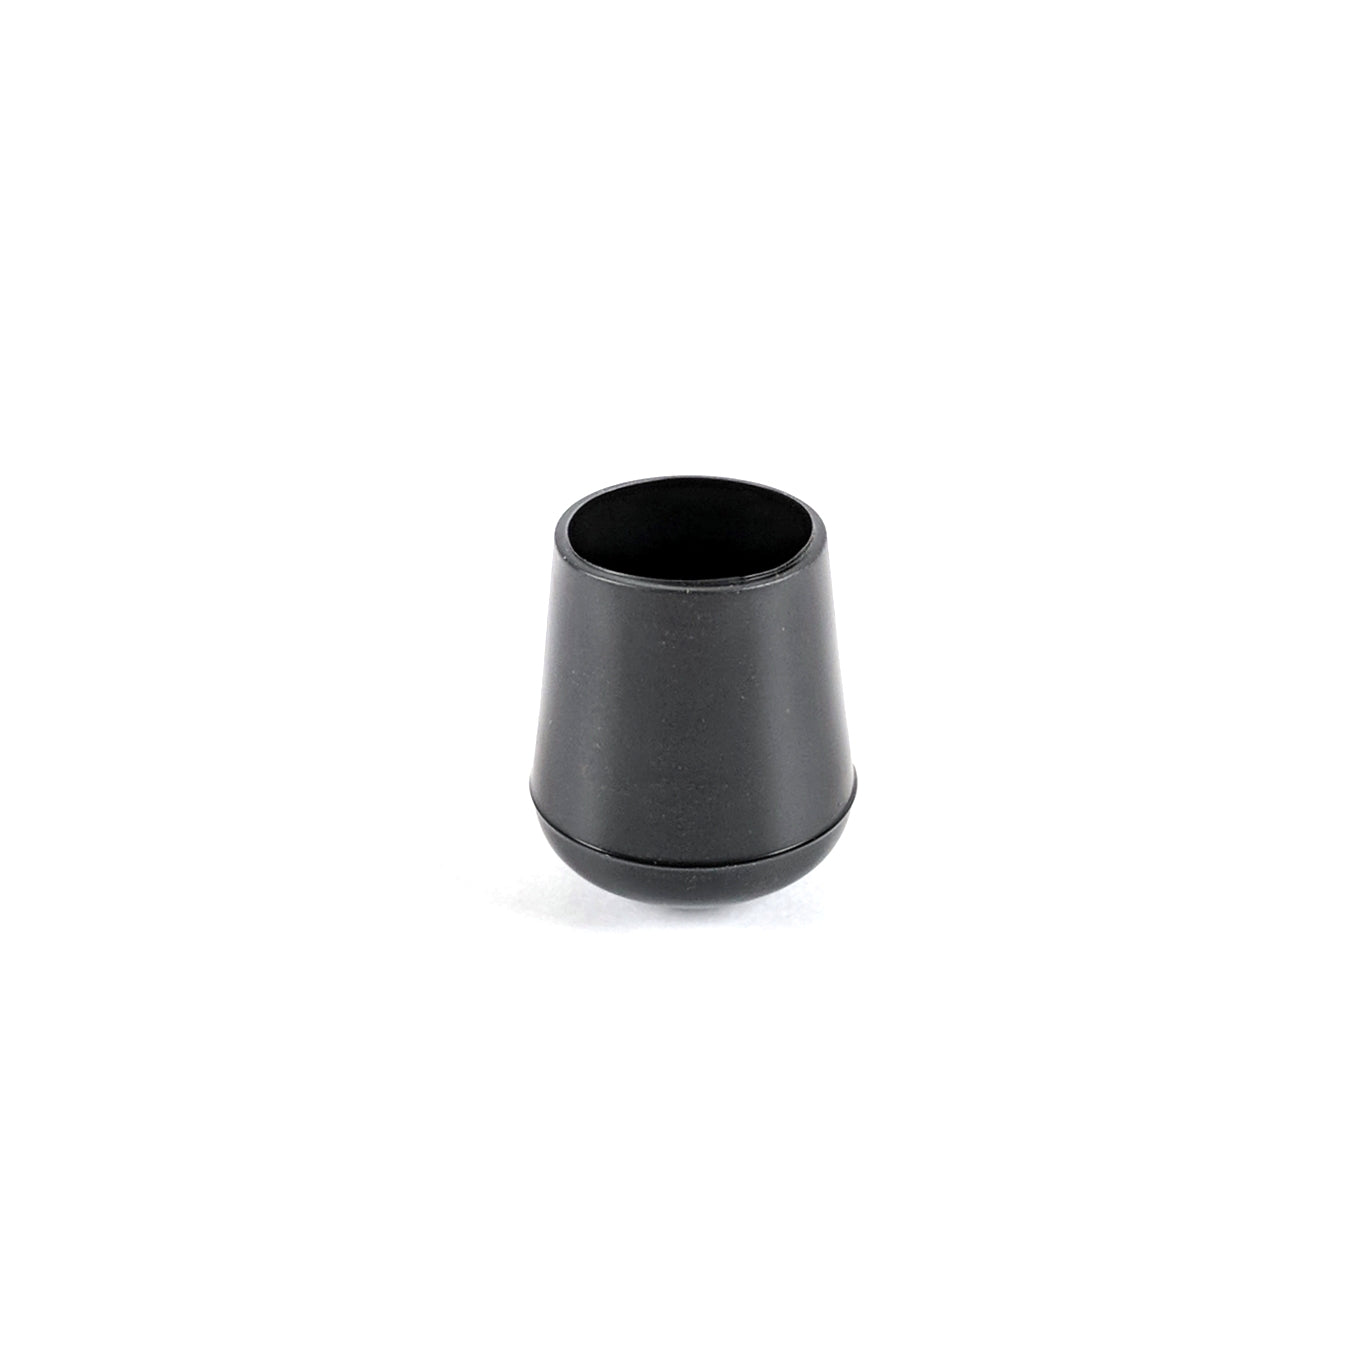 19mm Black Rubber Ferrules with Steel Base Insert - Made in Germany - Keay Vital Parts